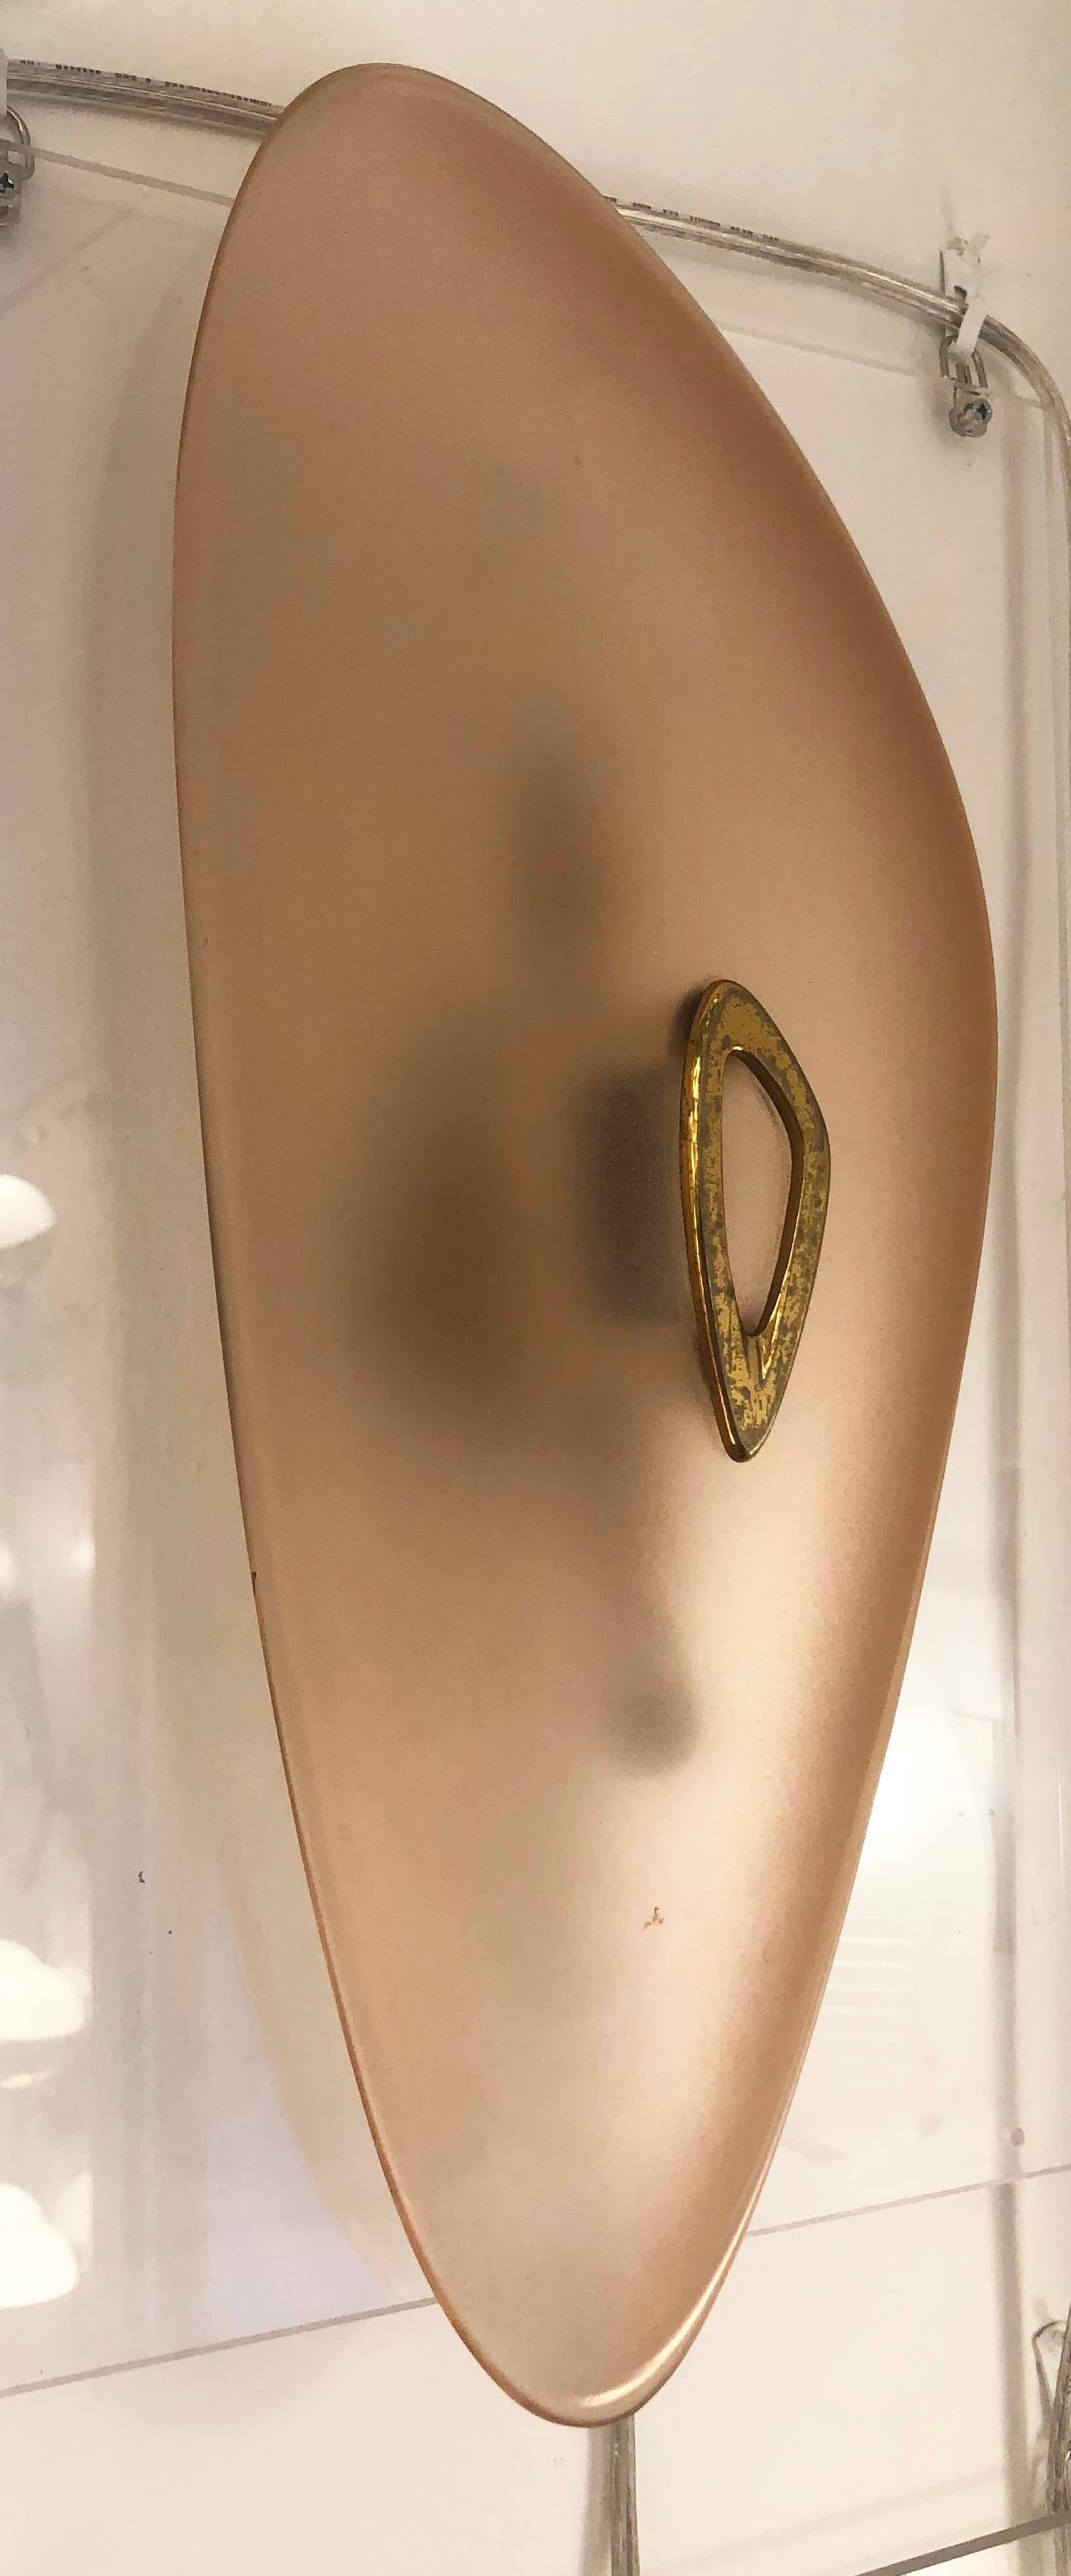 An extremely rare sconce by Max Ingrand for Fontana Arte. There is a brass decoration mimicking the irregular shape of the sconce in the middle of the salmon color frosted glass. The brass frame holds two candelabra sockets.
